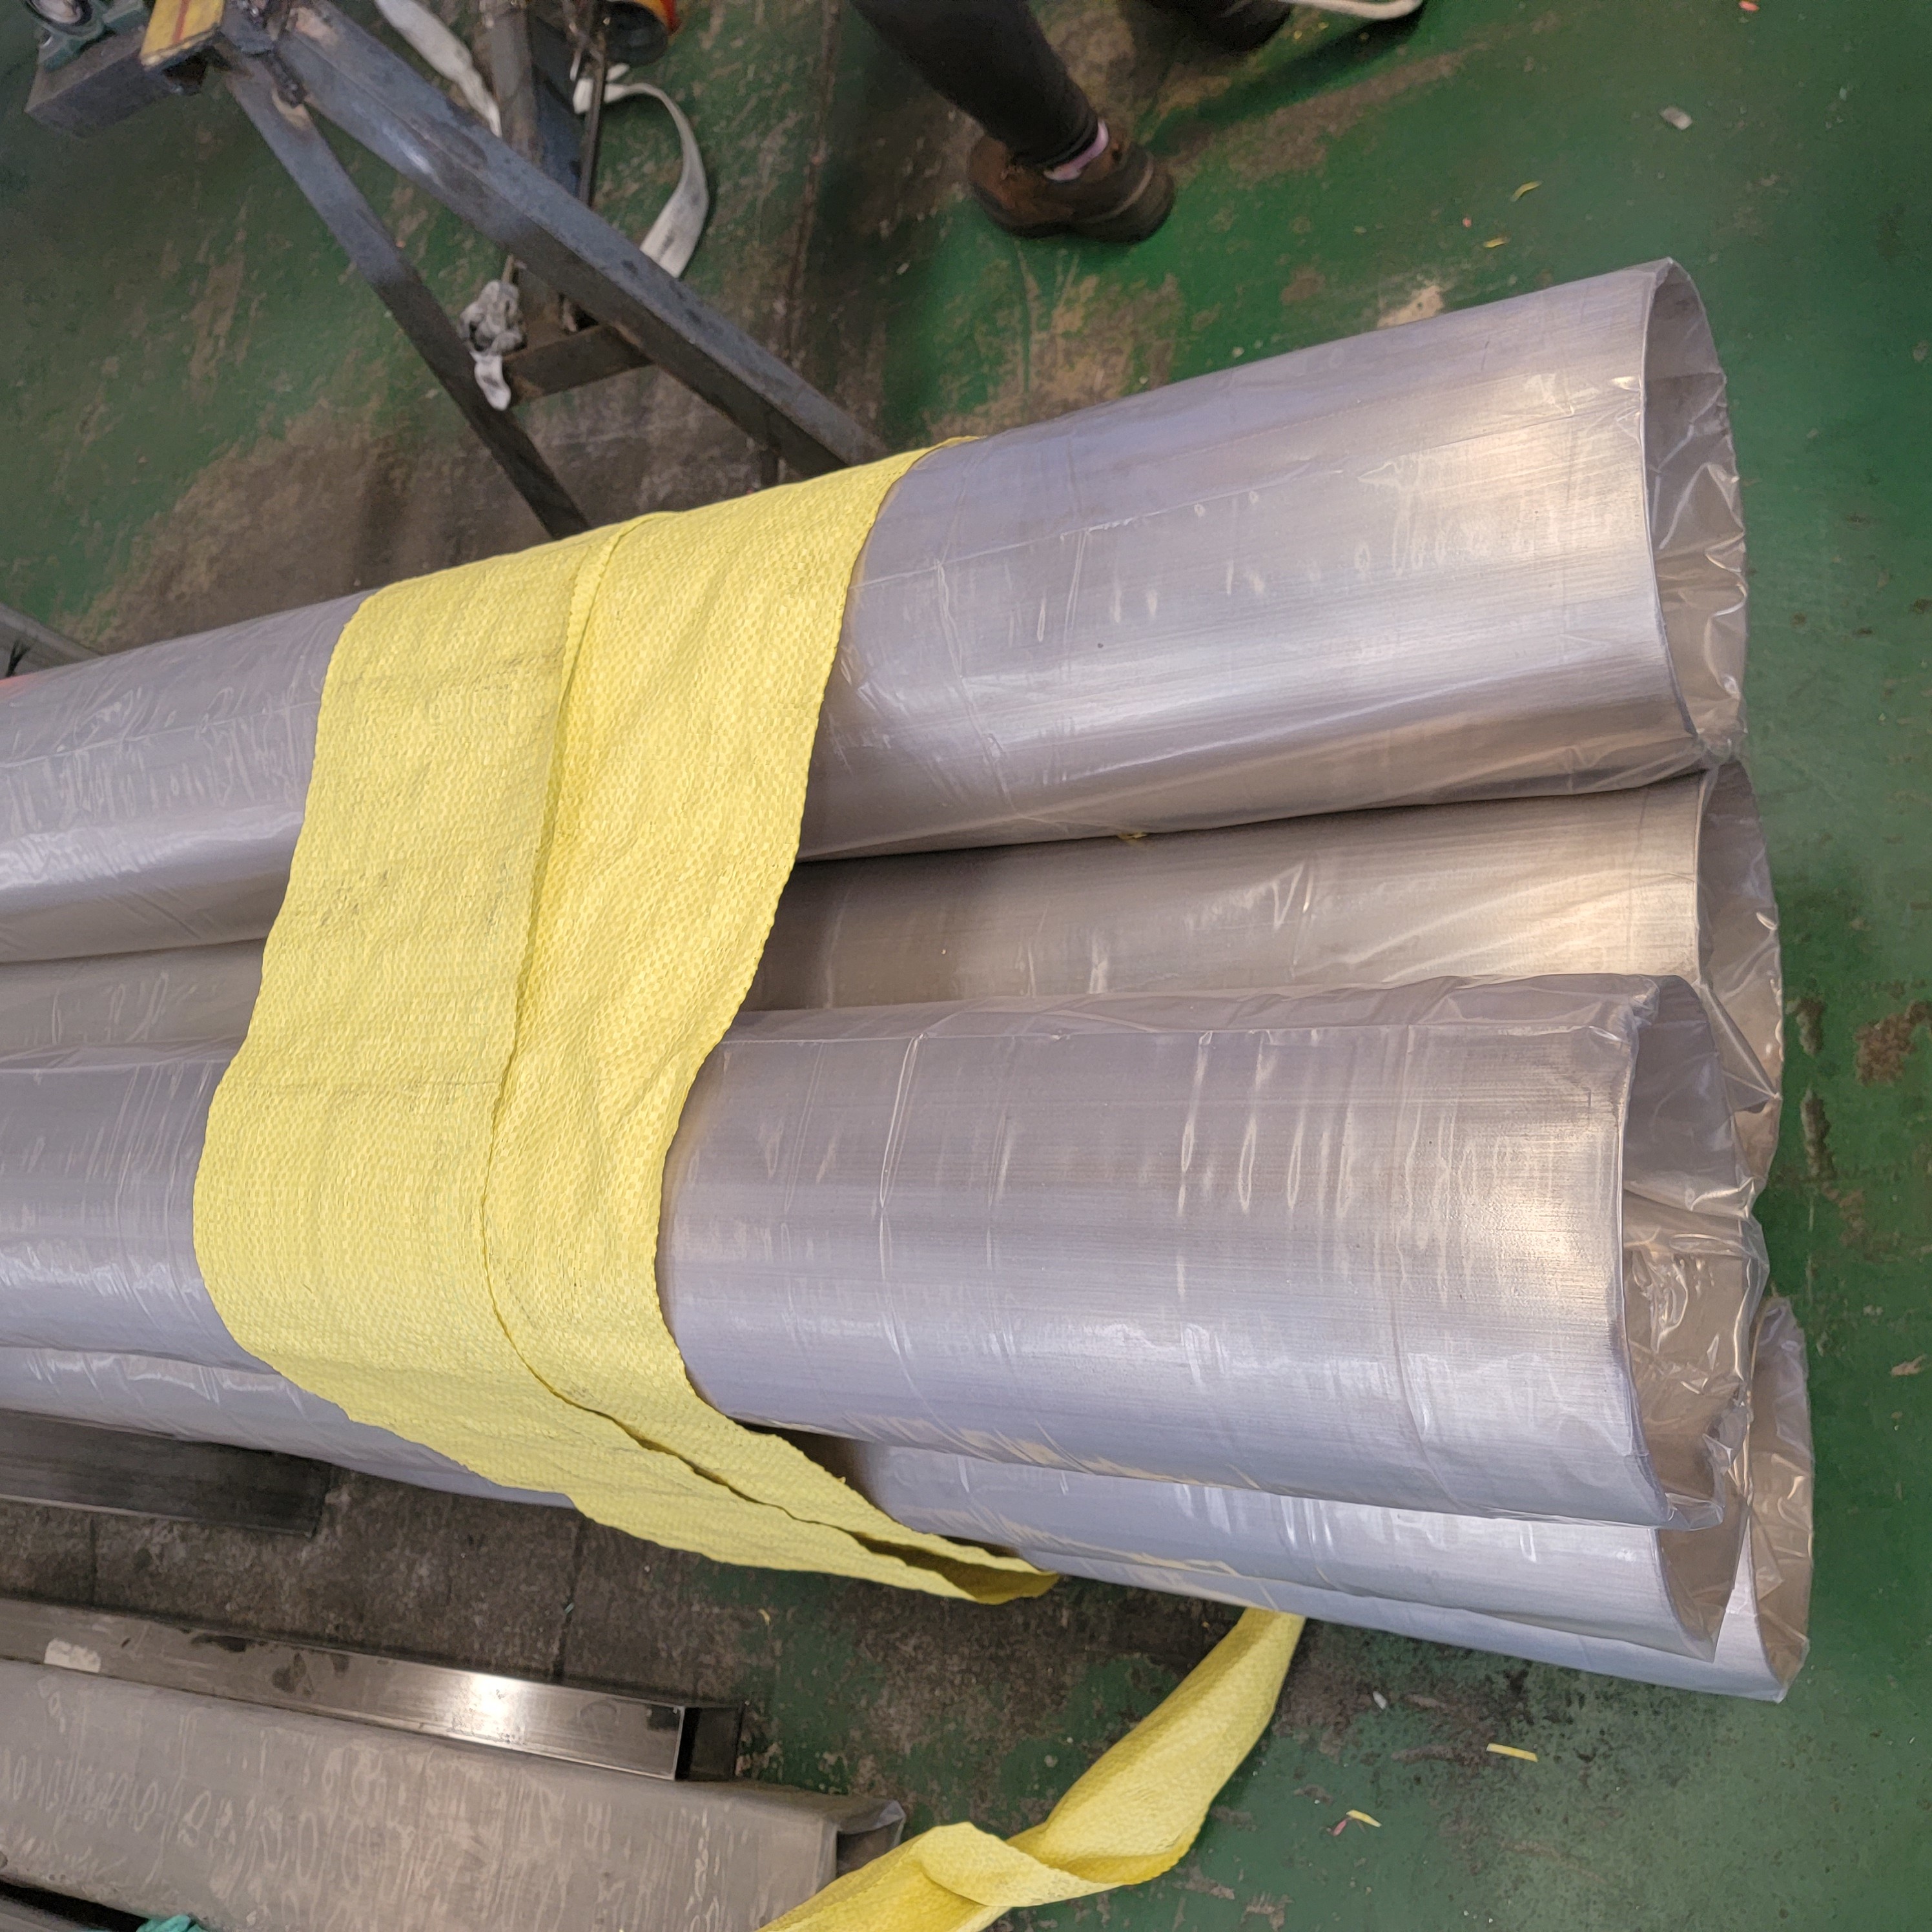 China Schedule 160 Schedule 120 Schedule 10 Seamless SS Pipe 28mm 35mm 25mm Od Stainless Steel Tube Astm wholesale